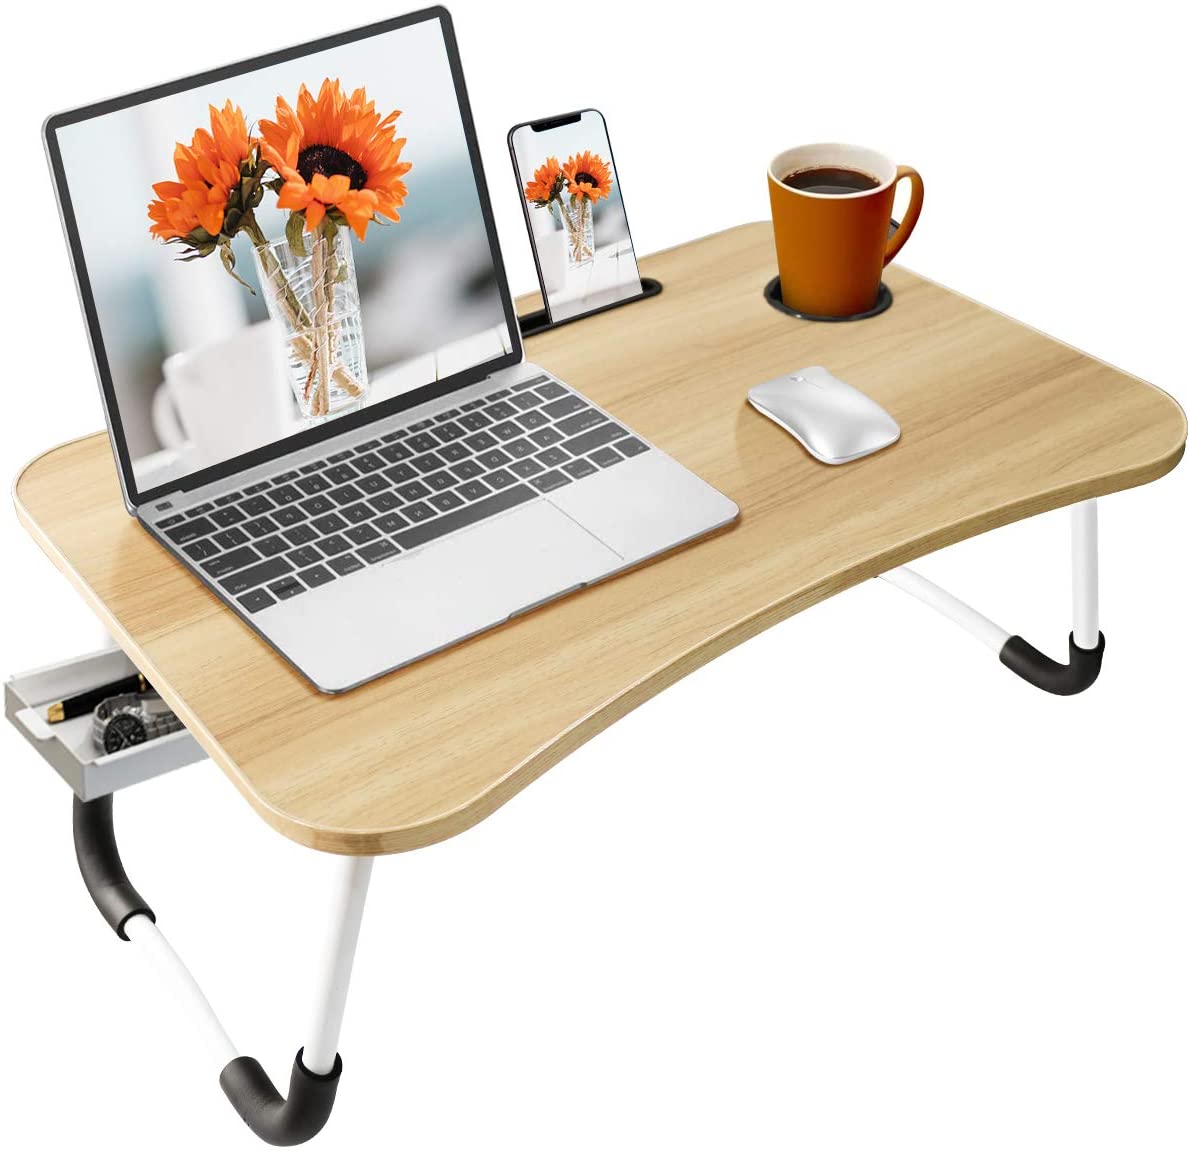 Review of BOPUROY Laptop Desk Foldable Bed Table Portable Multi-Function Lap Bed Tray Table